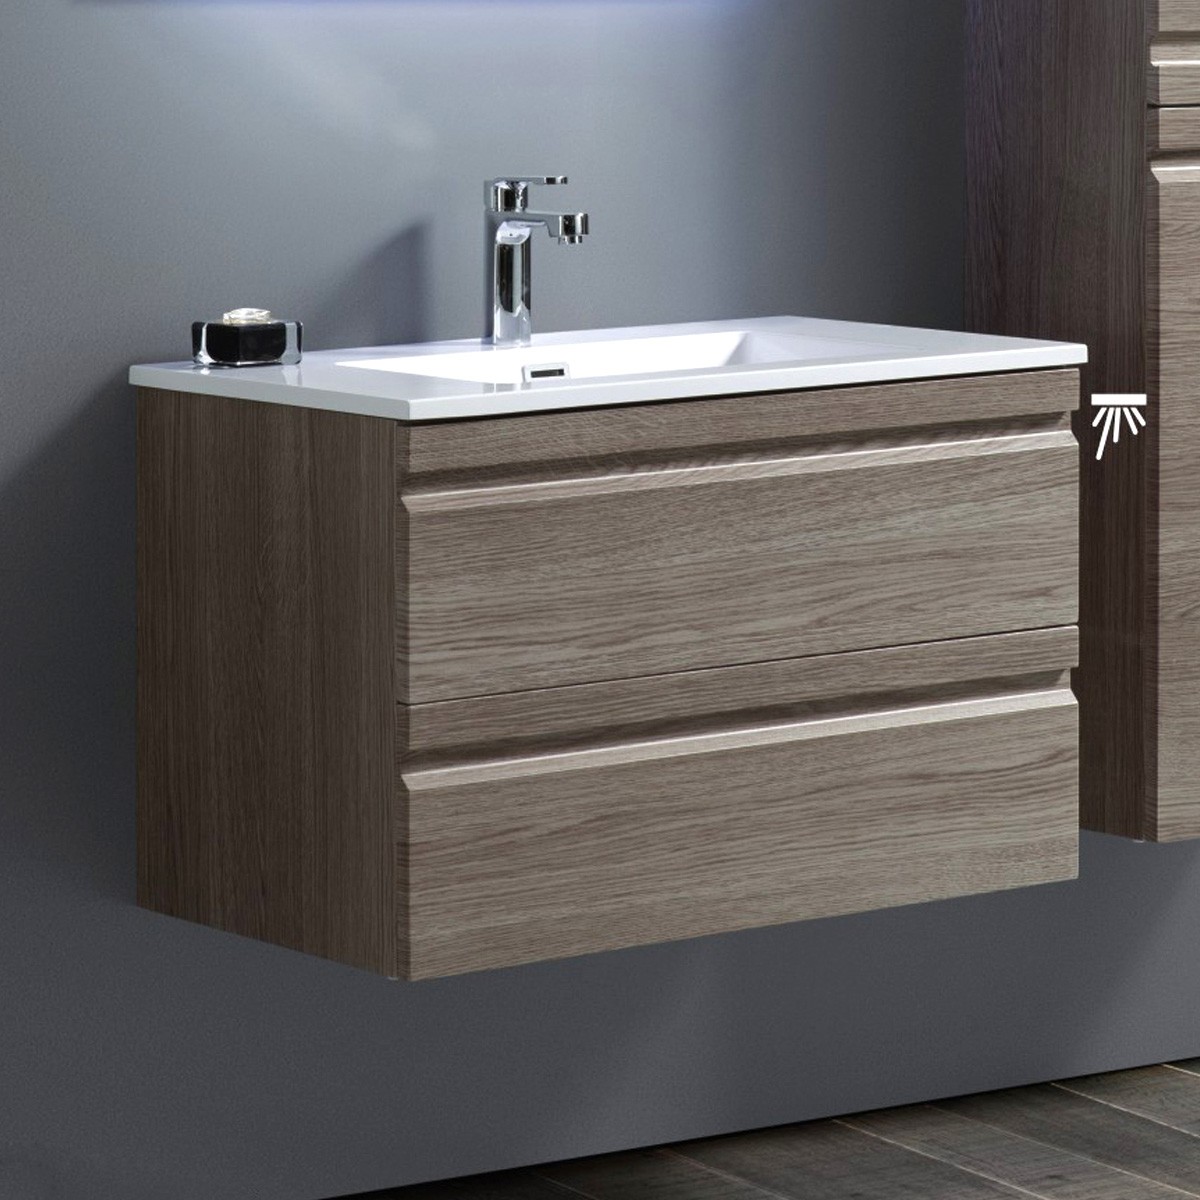 32 In. Wall Mount Vanity with Basin (ZRW8002-V)